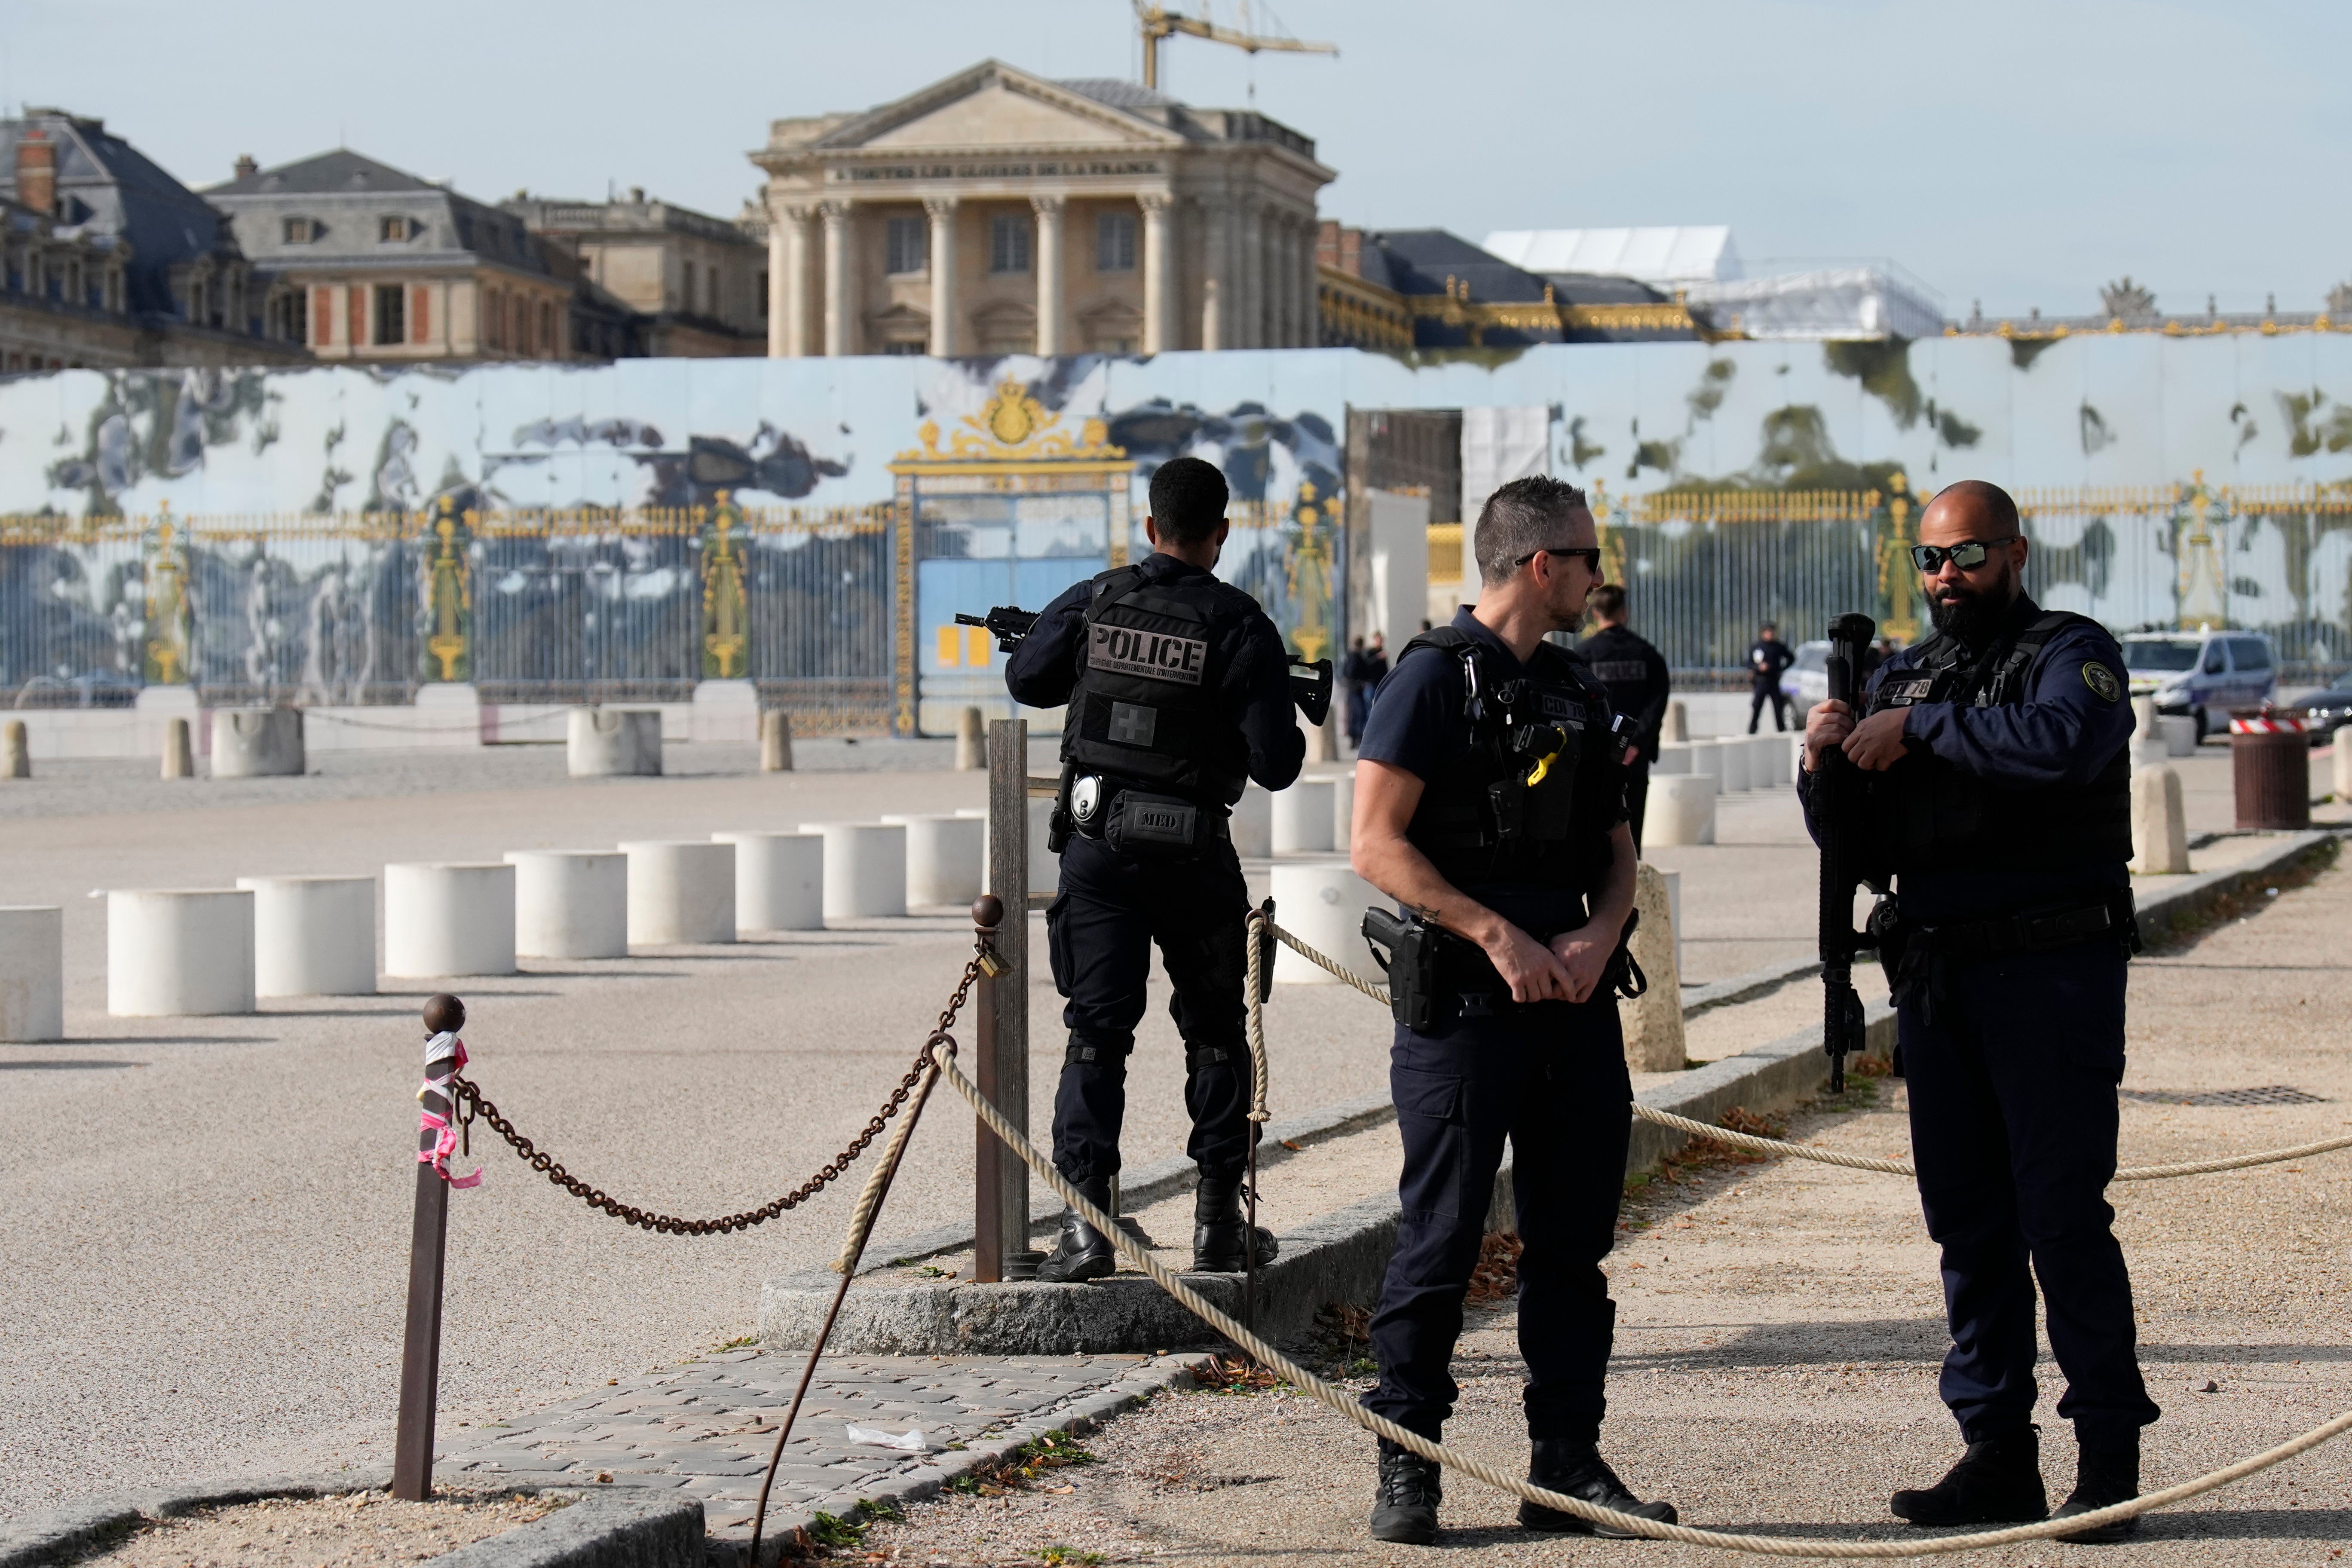 French police officers were guarding the entrance of the Chateau de Versailles after a security alert Tuesday